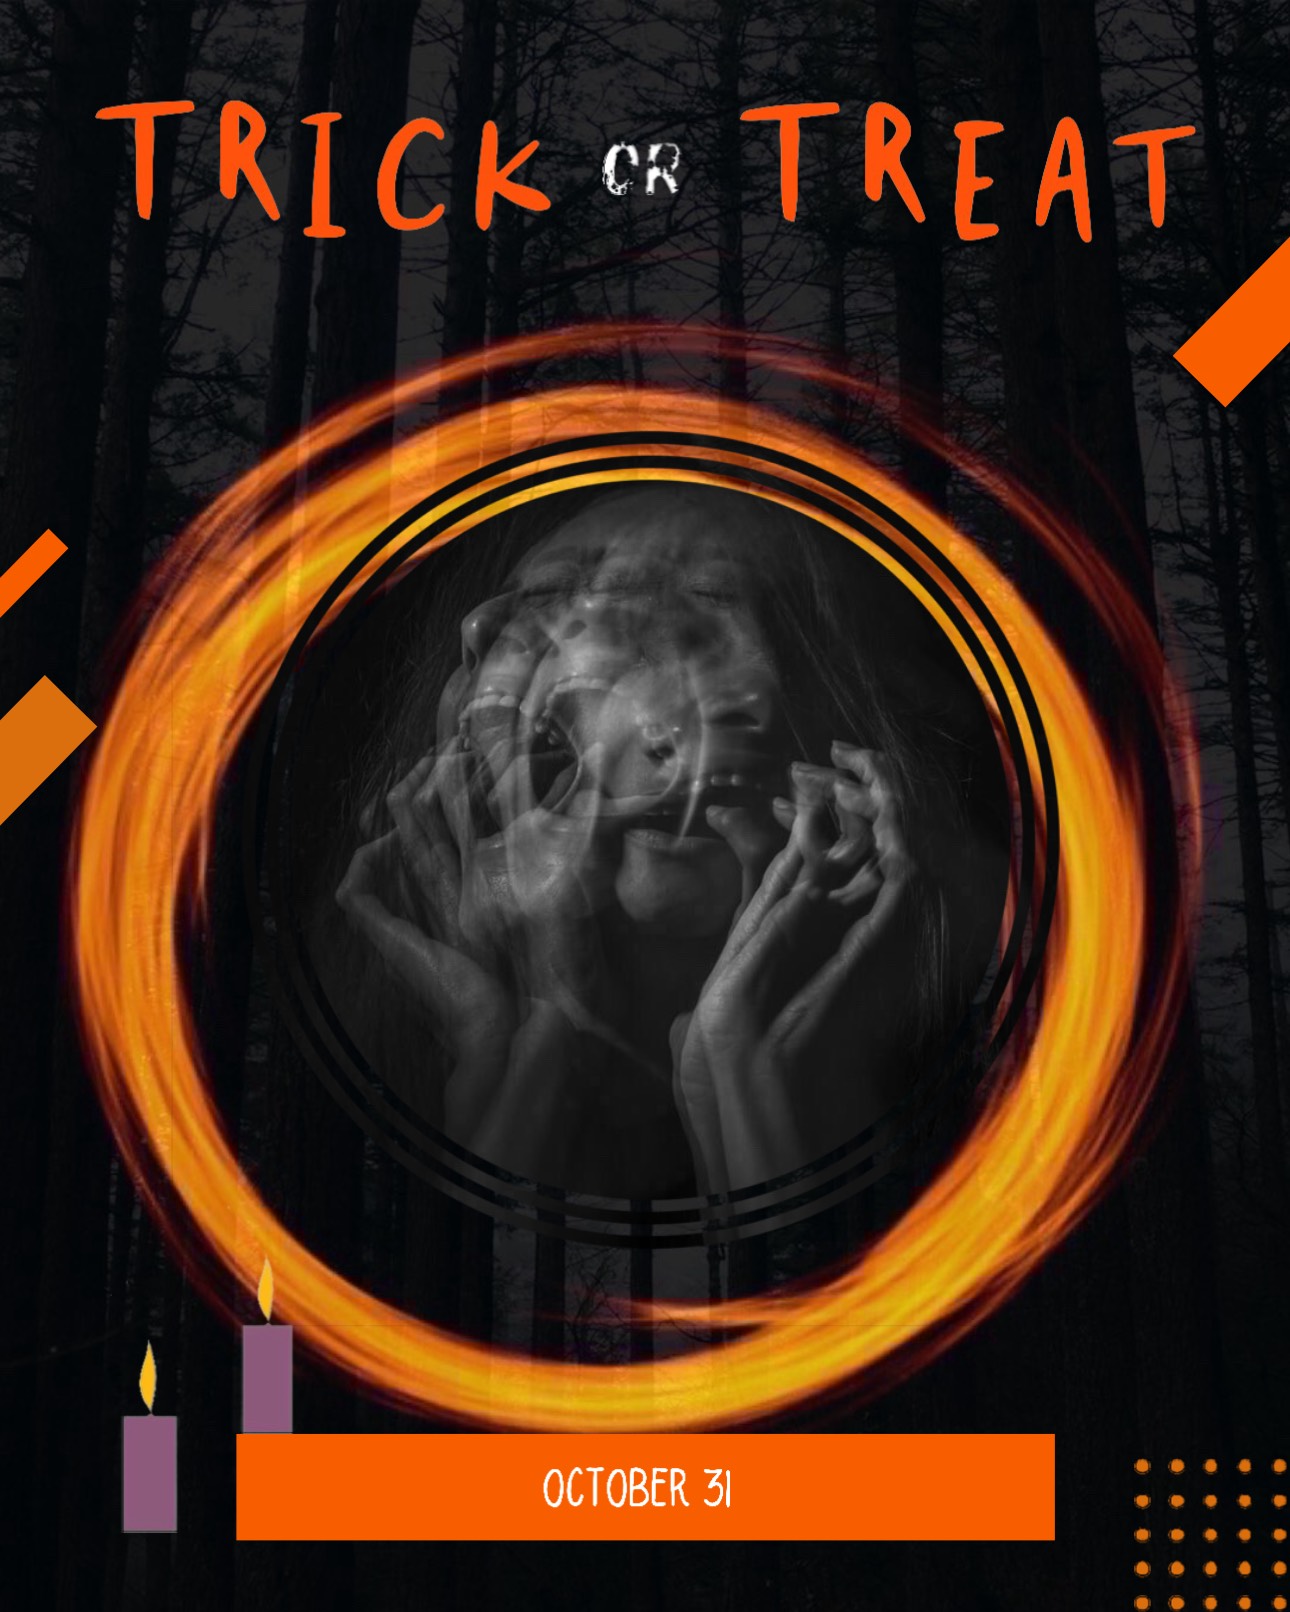 A Poster For A Trick Or Treat Event By Fred A. Precht Halloween Template